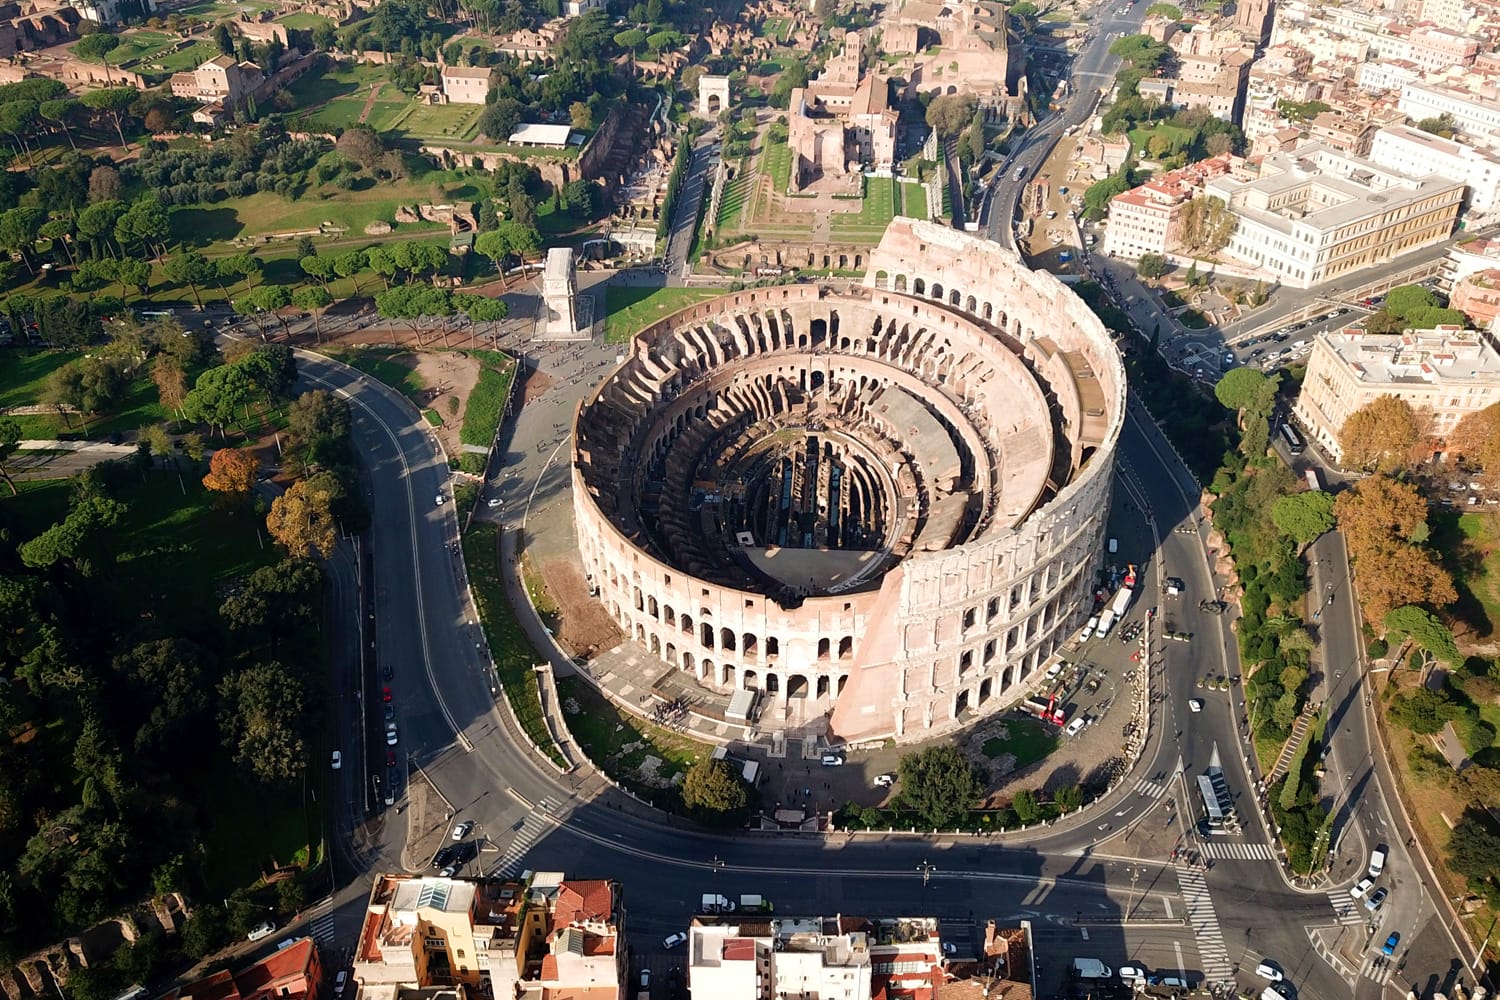 Aerial drone view of iconic and beautiful ancient Arena of Colosseum, also known as the Flavian amphitheatre in the heart of Rome, Italy